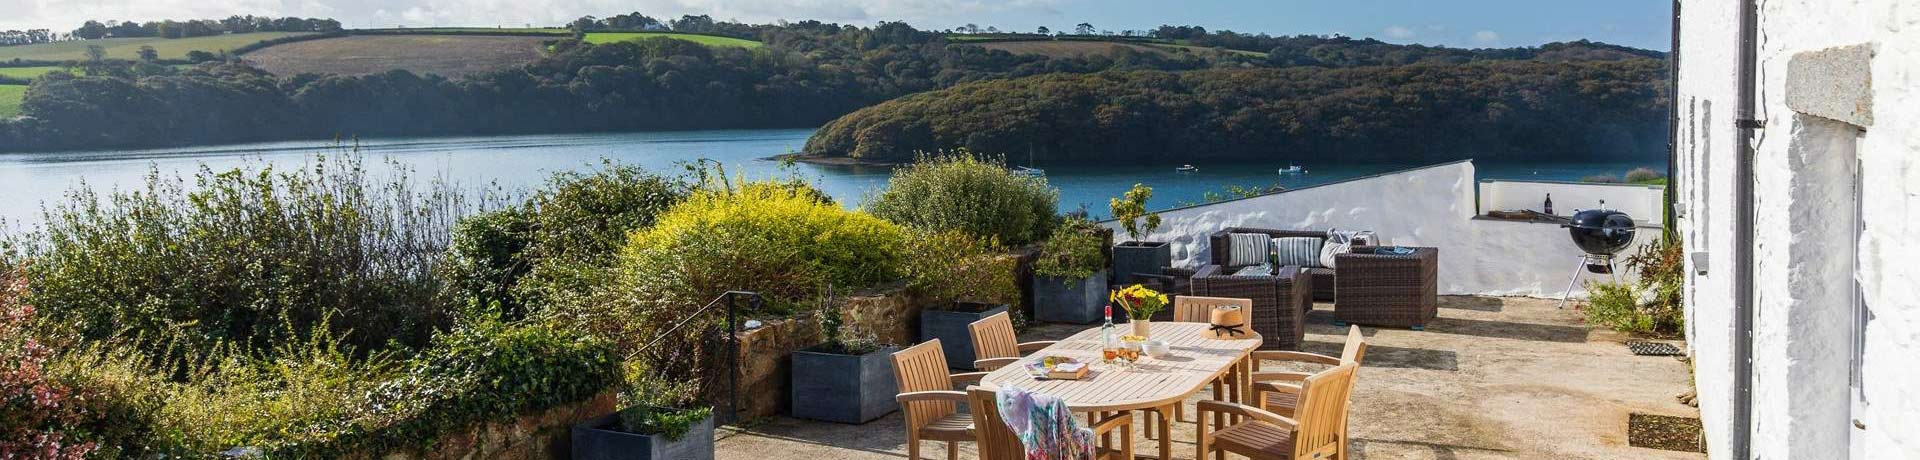 Holiday cottages with moorings in Cornwall